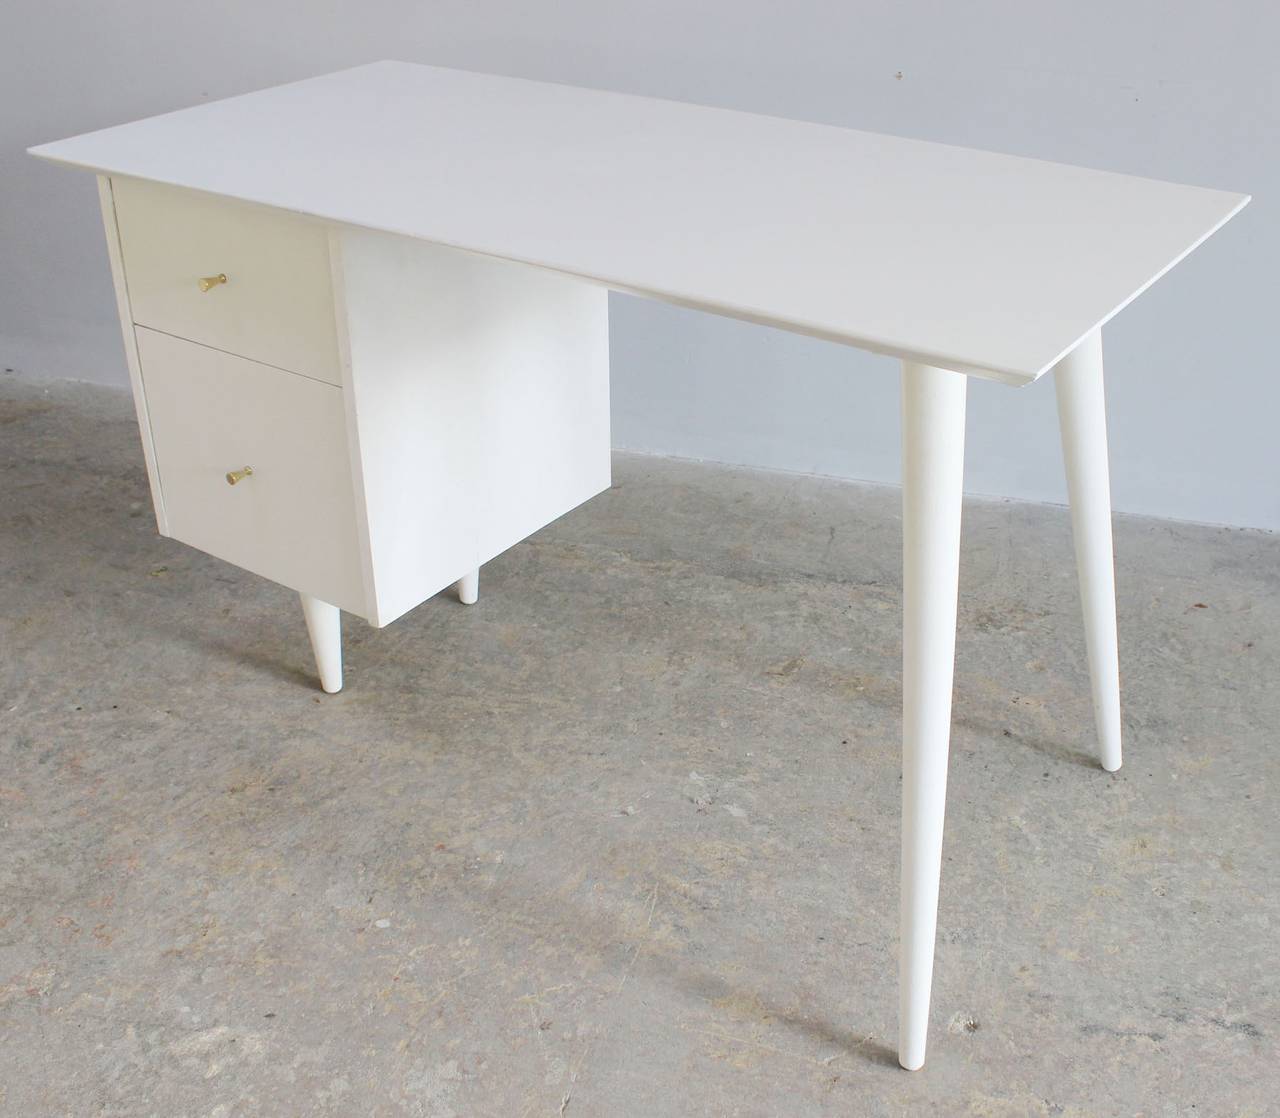 The classic one-side drawer Planner Group desk with brass drawer pulls and formica top, by Paul McCobb.